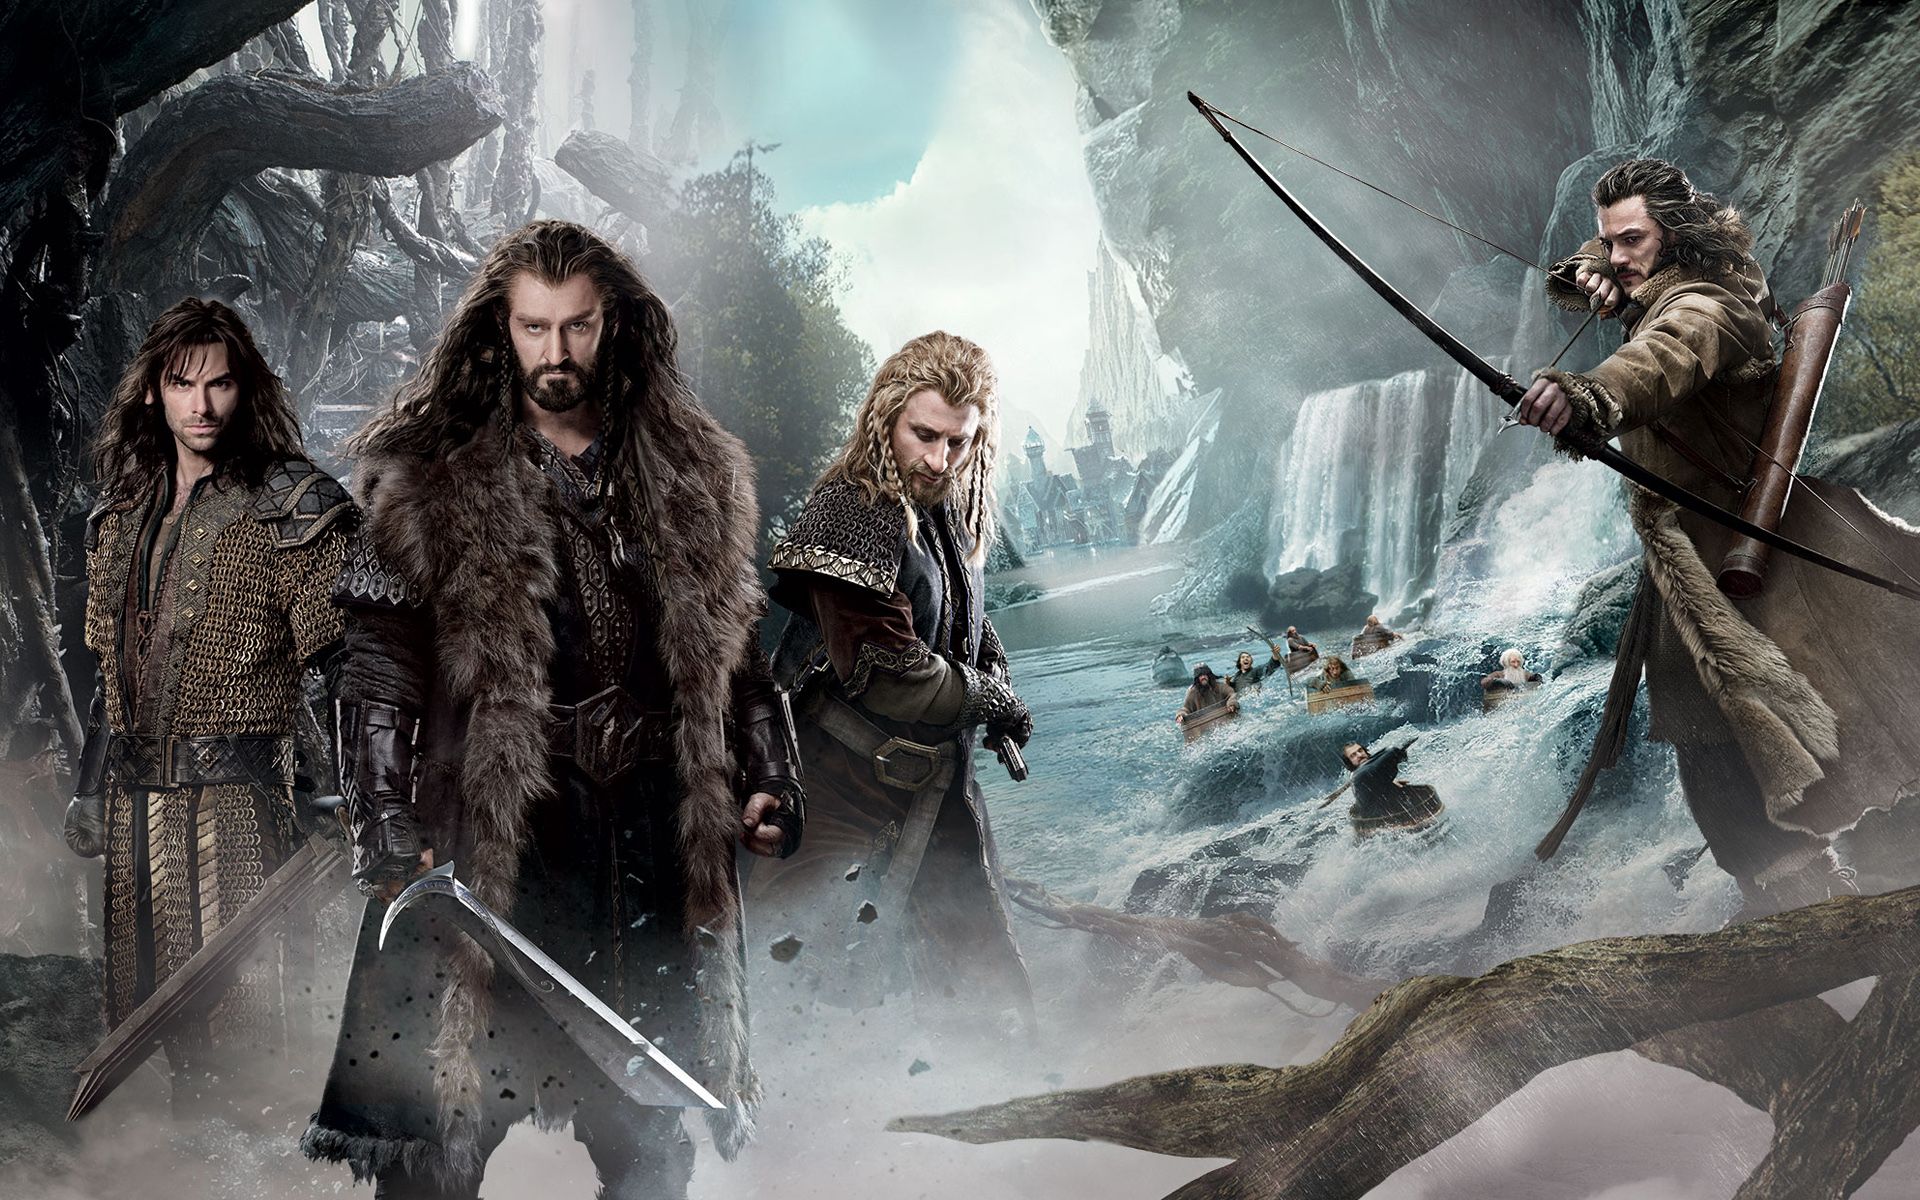 Hobbit 4K wallpaper for your desktop or mobile screen free and easy to download